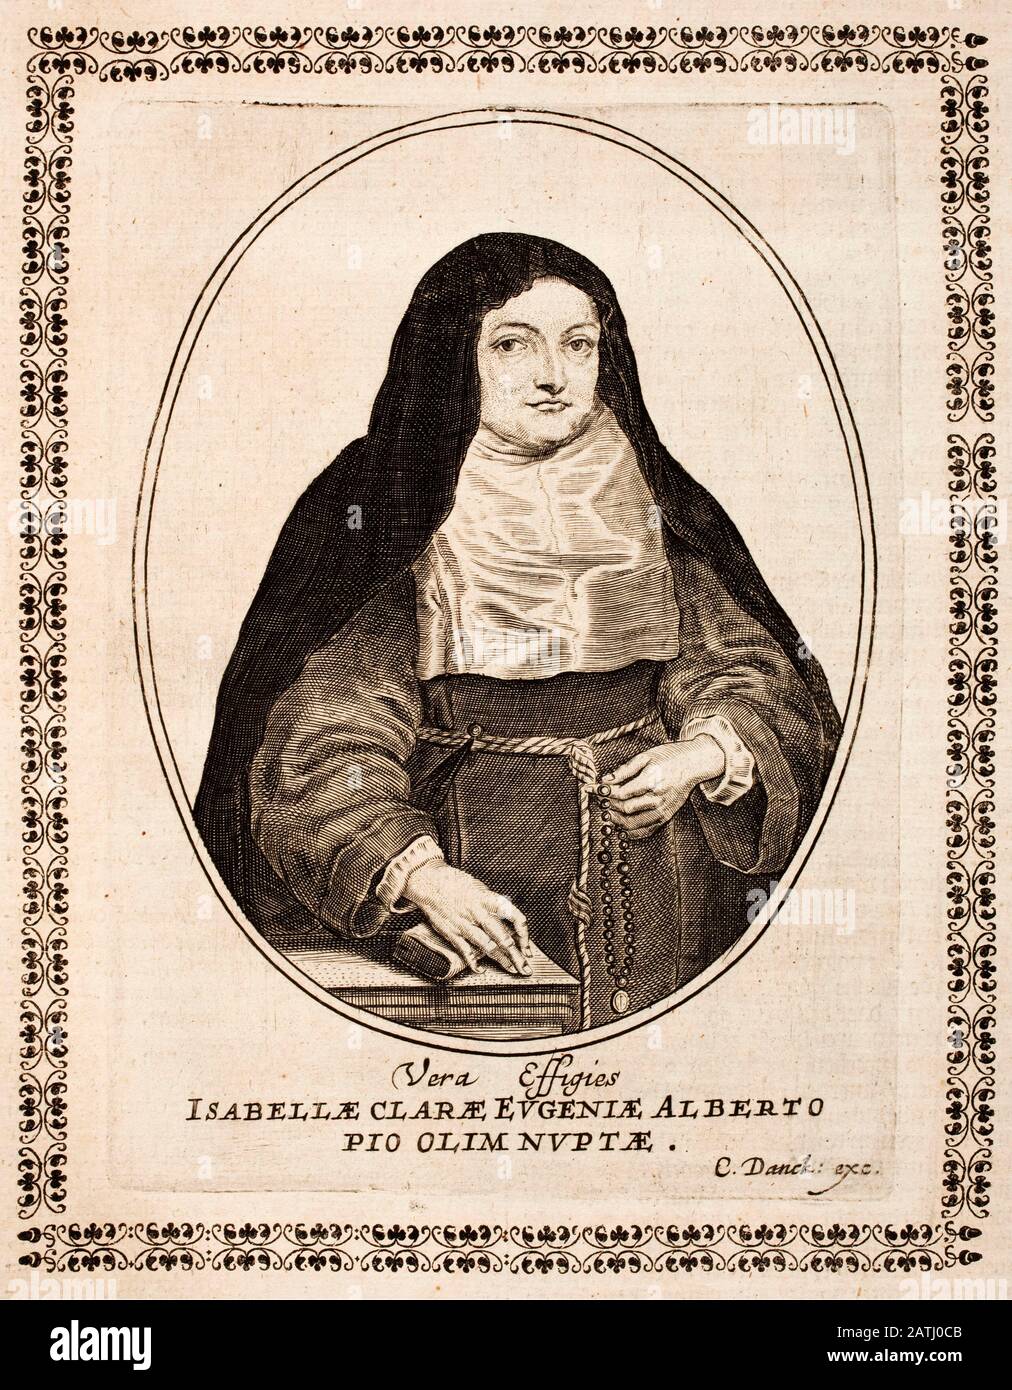 Portrait of Isabella Clara Eugenia (1566-1633), sovereign of the Spanish Netherlands in the Low Countries and the north of modern France, together wit Stock Photo